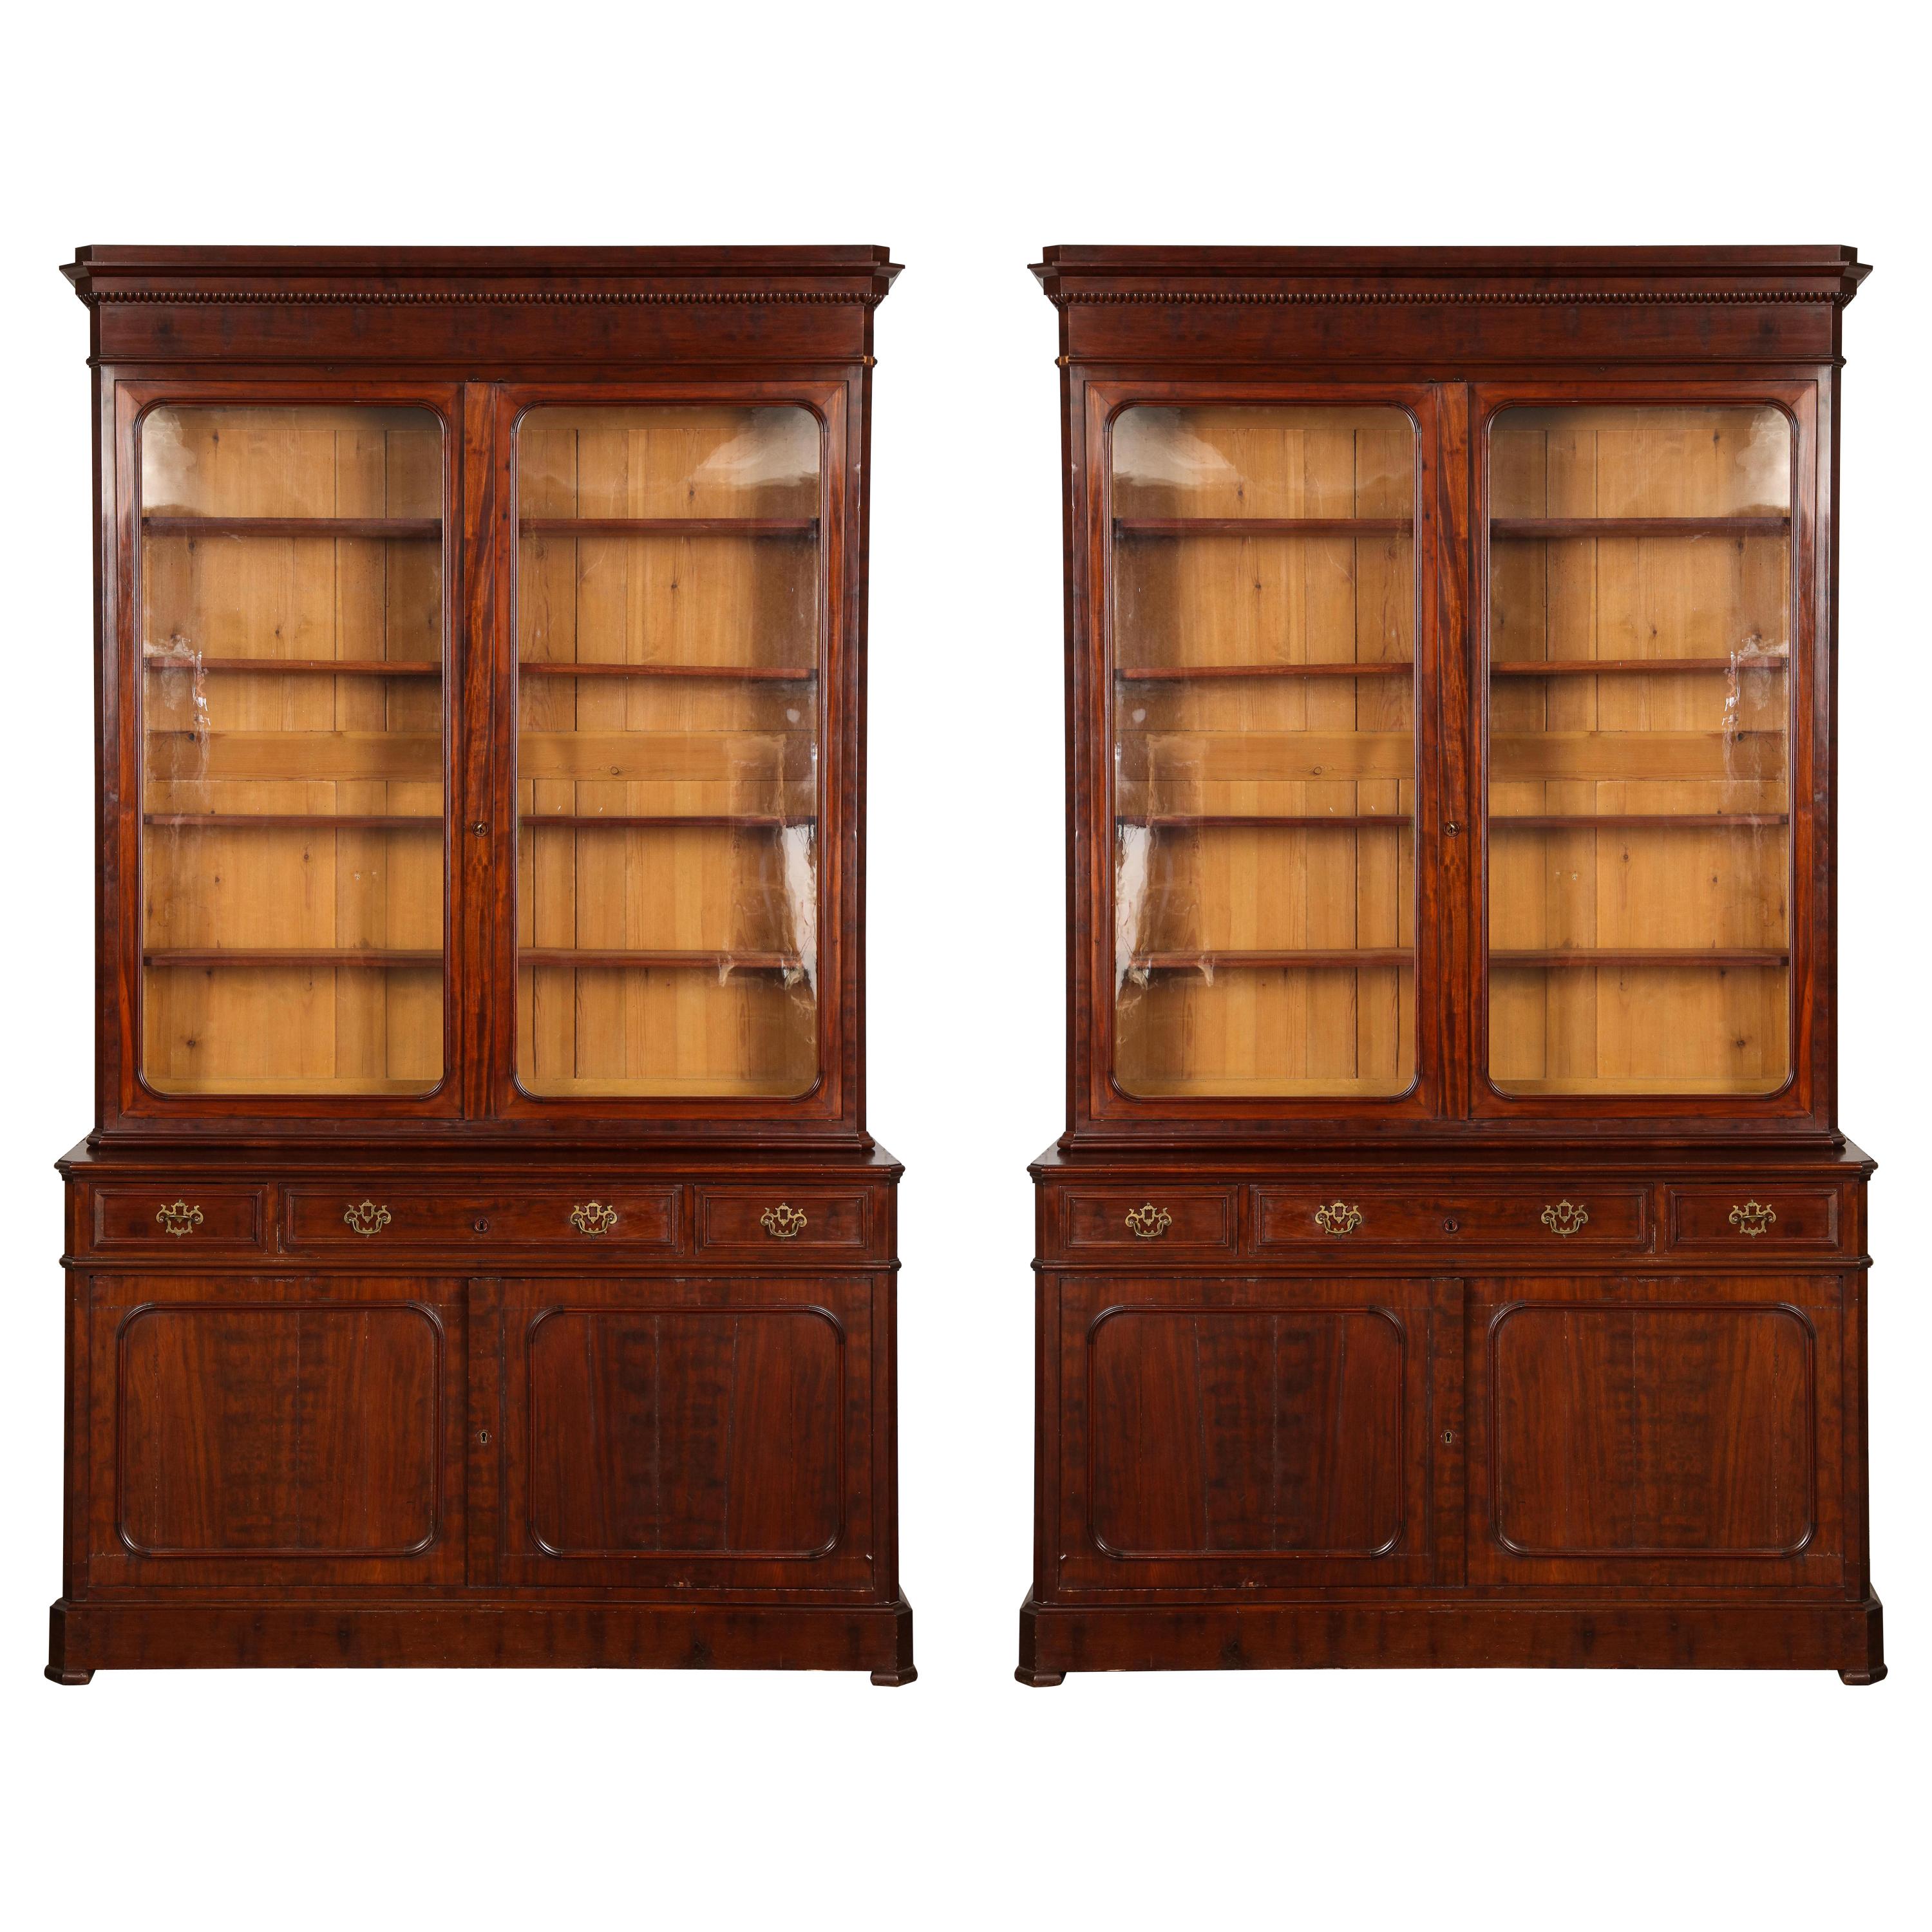 Pair of William IV Mahogany Glass-Front Bookcases of Large Scale